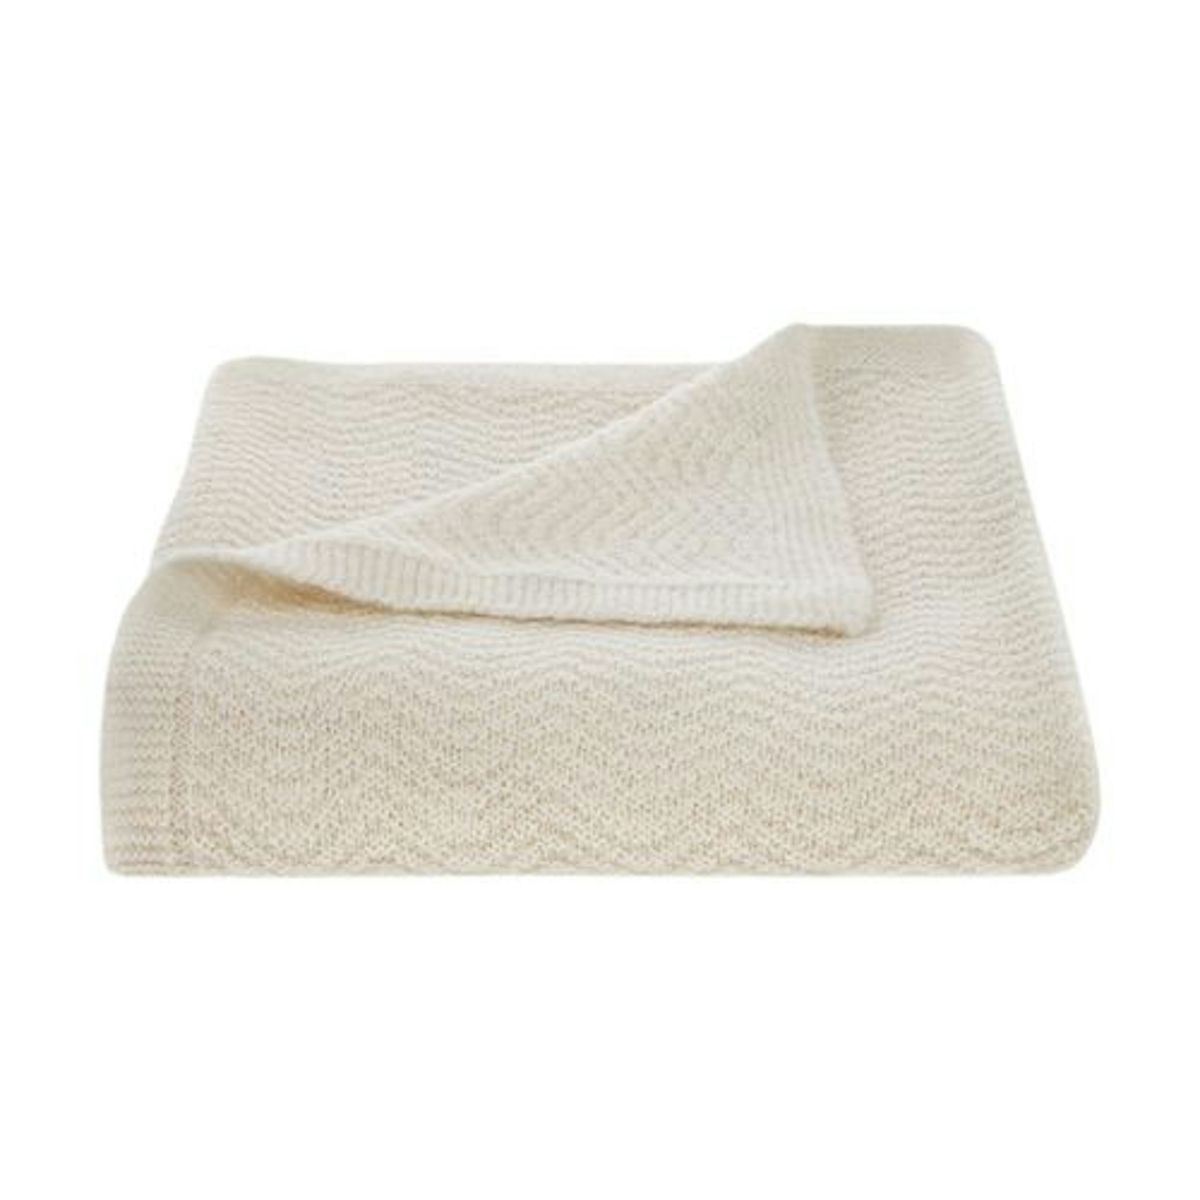 Cream Wave Knitted Throw - 9 Best Luxury Throws and Blankets to Buy for your Home - Style Guide - LuxDeco.com